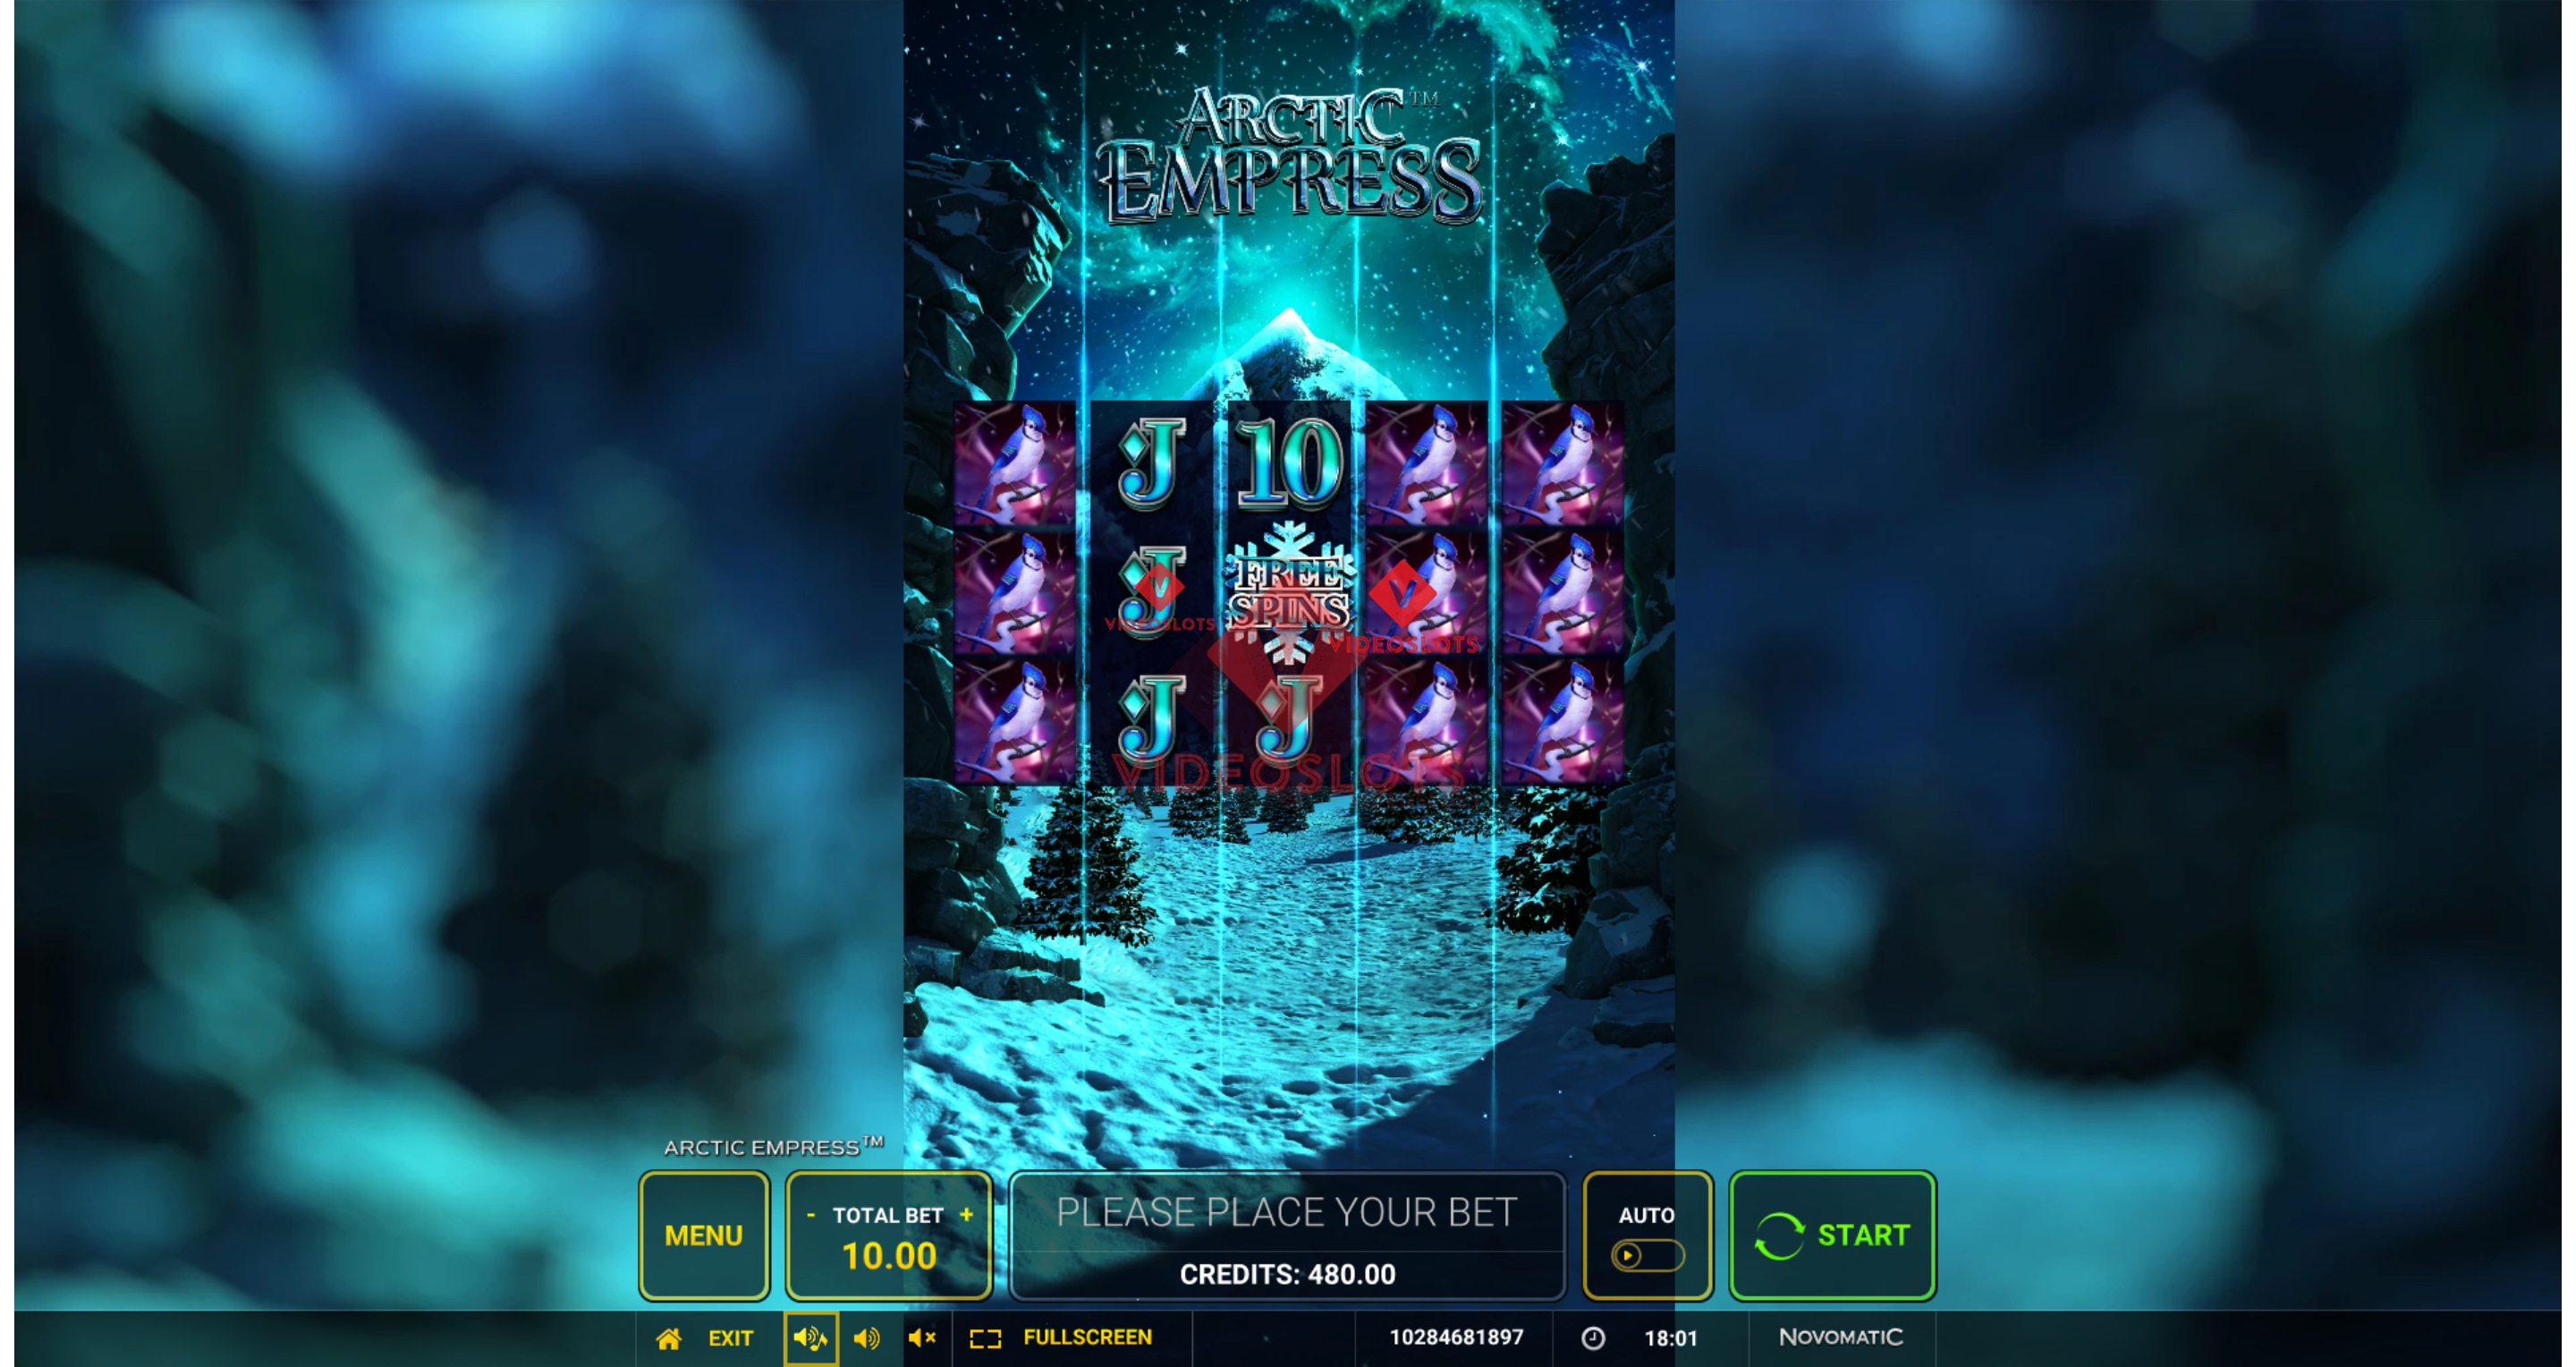 Base Game for Arctic Empress slot from Greentube